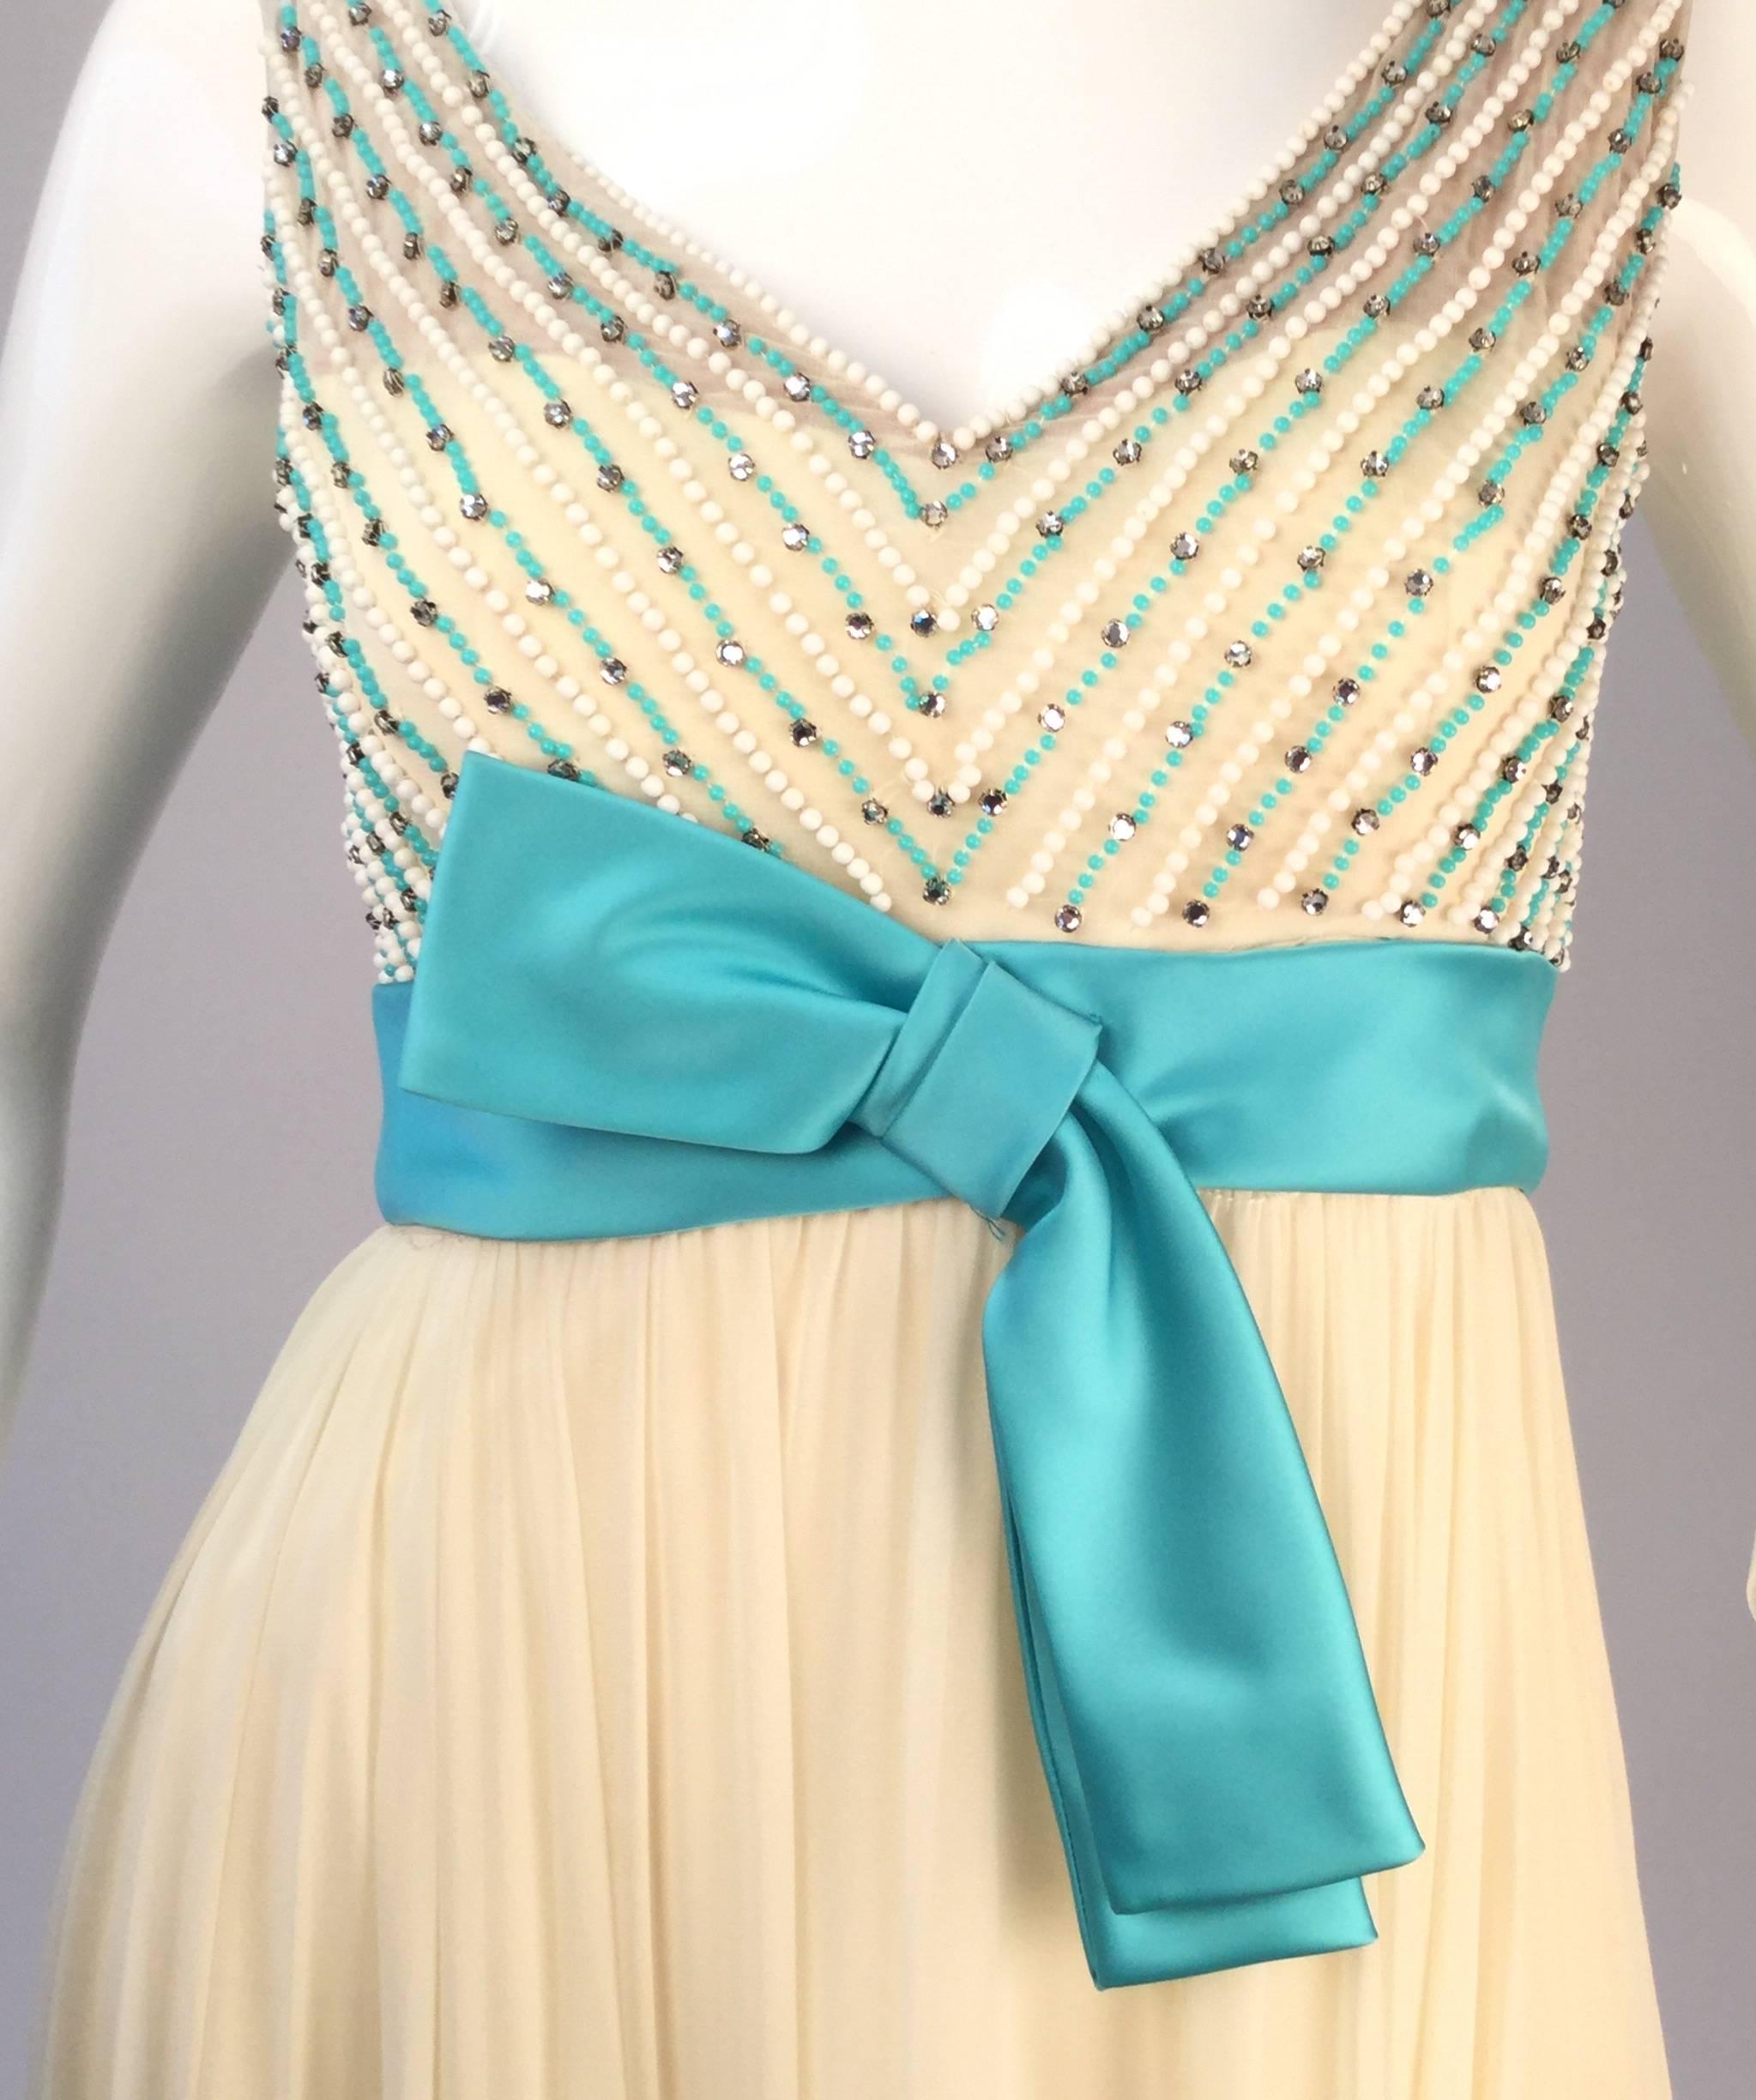  1960s evening gown from historic Houston boutique Isabell Gerhart. This gorgeous cream and turquoise silk dress features a heavily beaded bodice adorned with rhinestones. A turquoise silk satin sash with a bow adds flair to the waist, and closes in